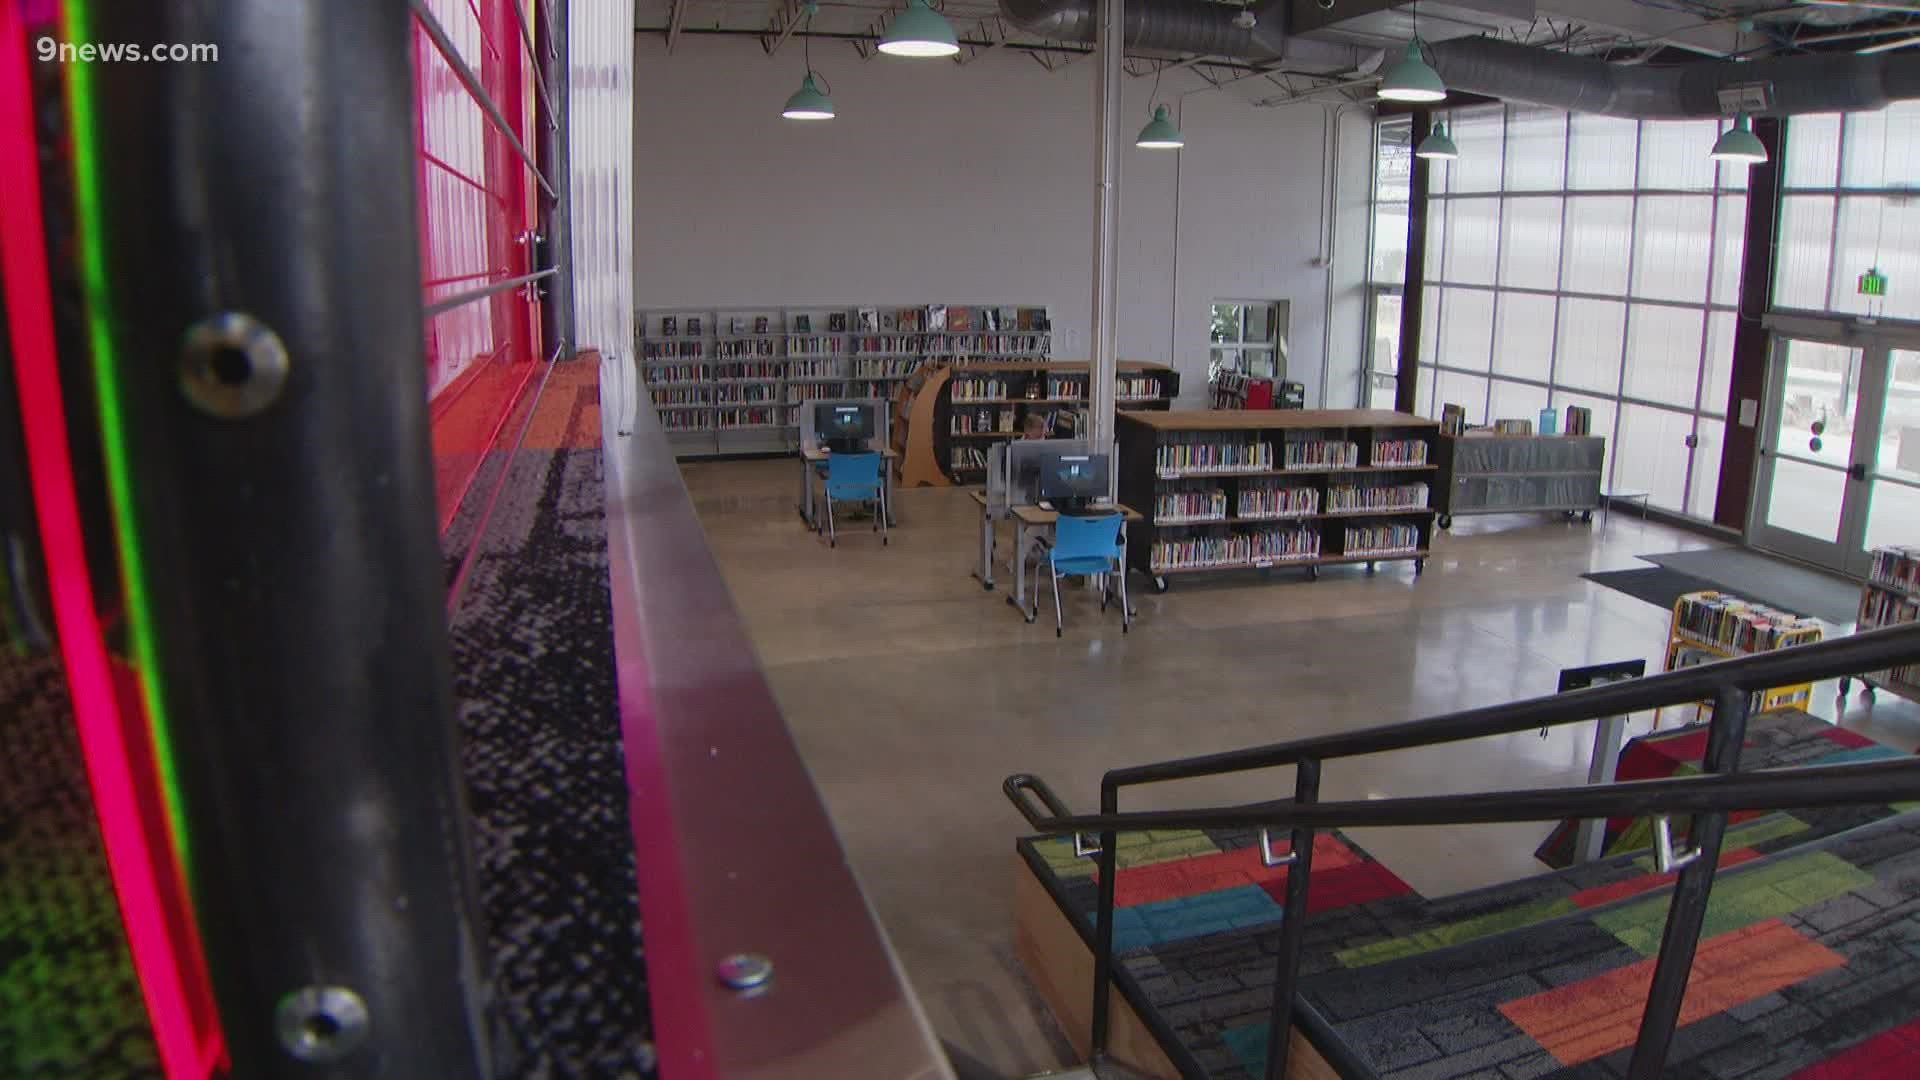 The new library will serve North Denver and is part of the ArtPark Community Hub.